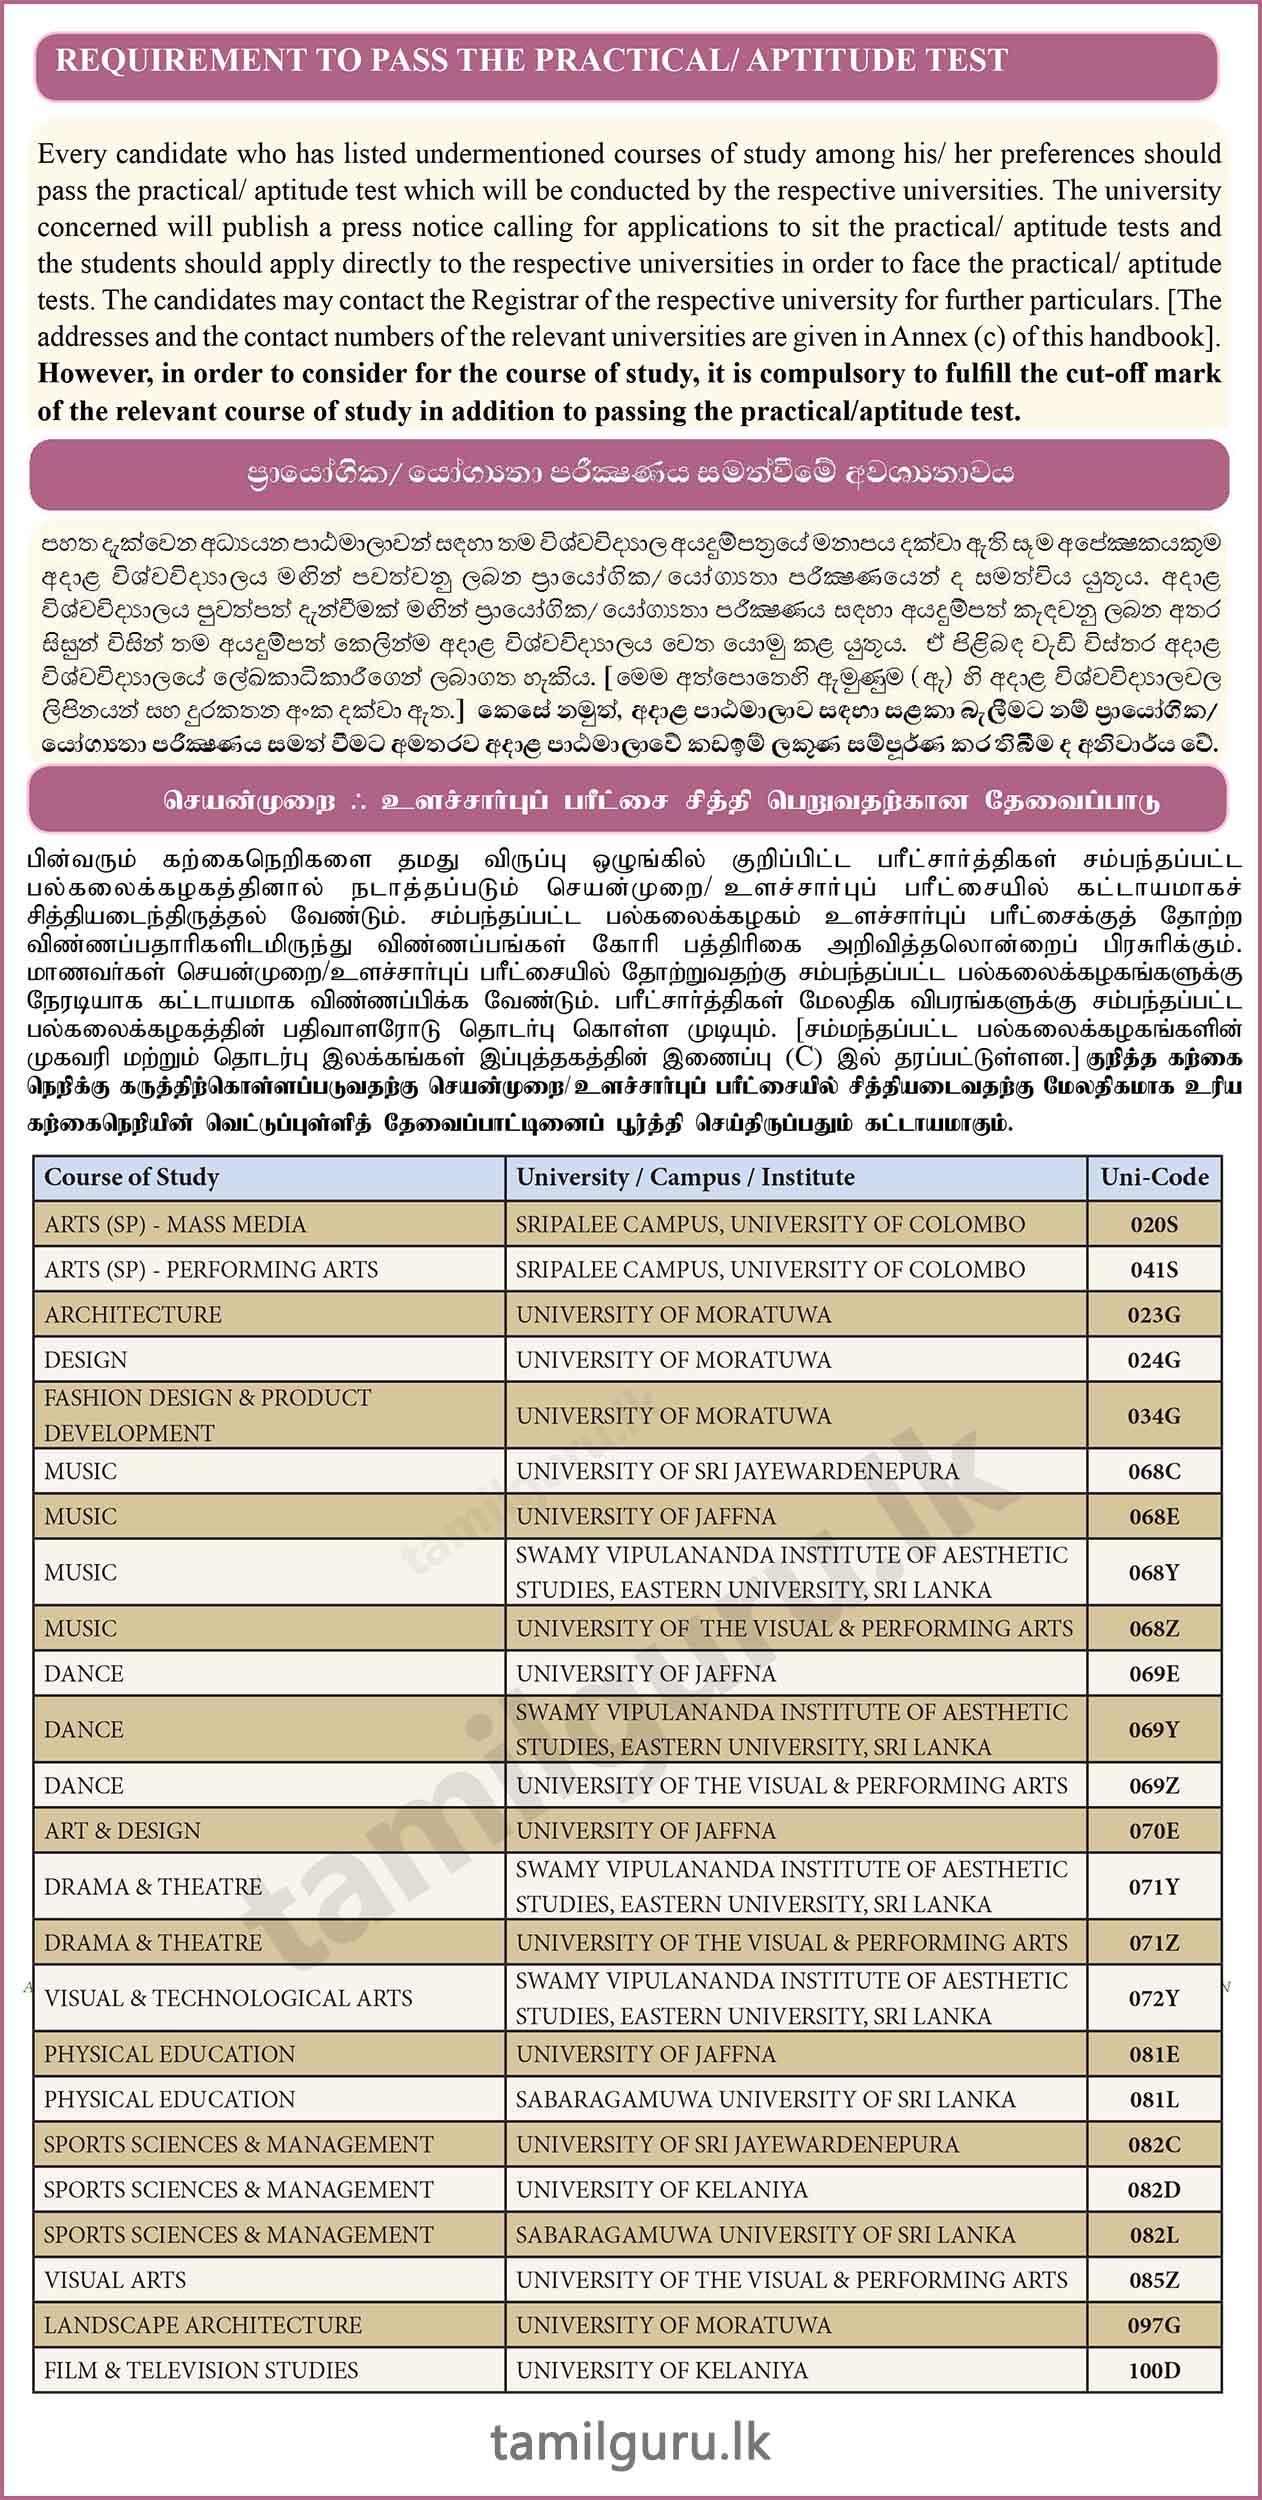 University Aptitude Test Applications - 2023/2024 for All Universities and Courses